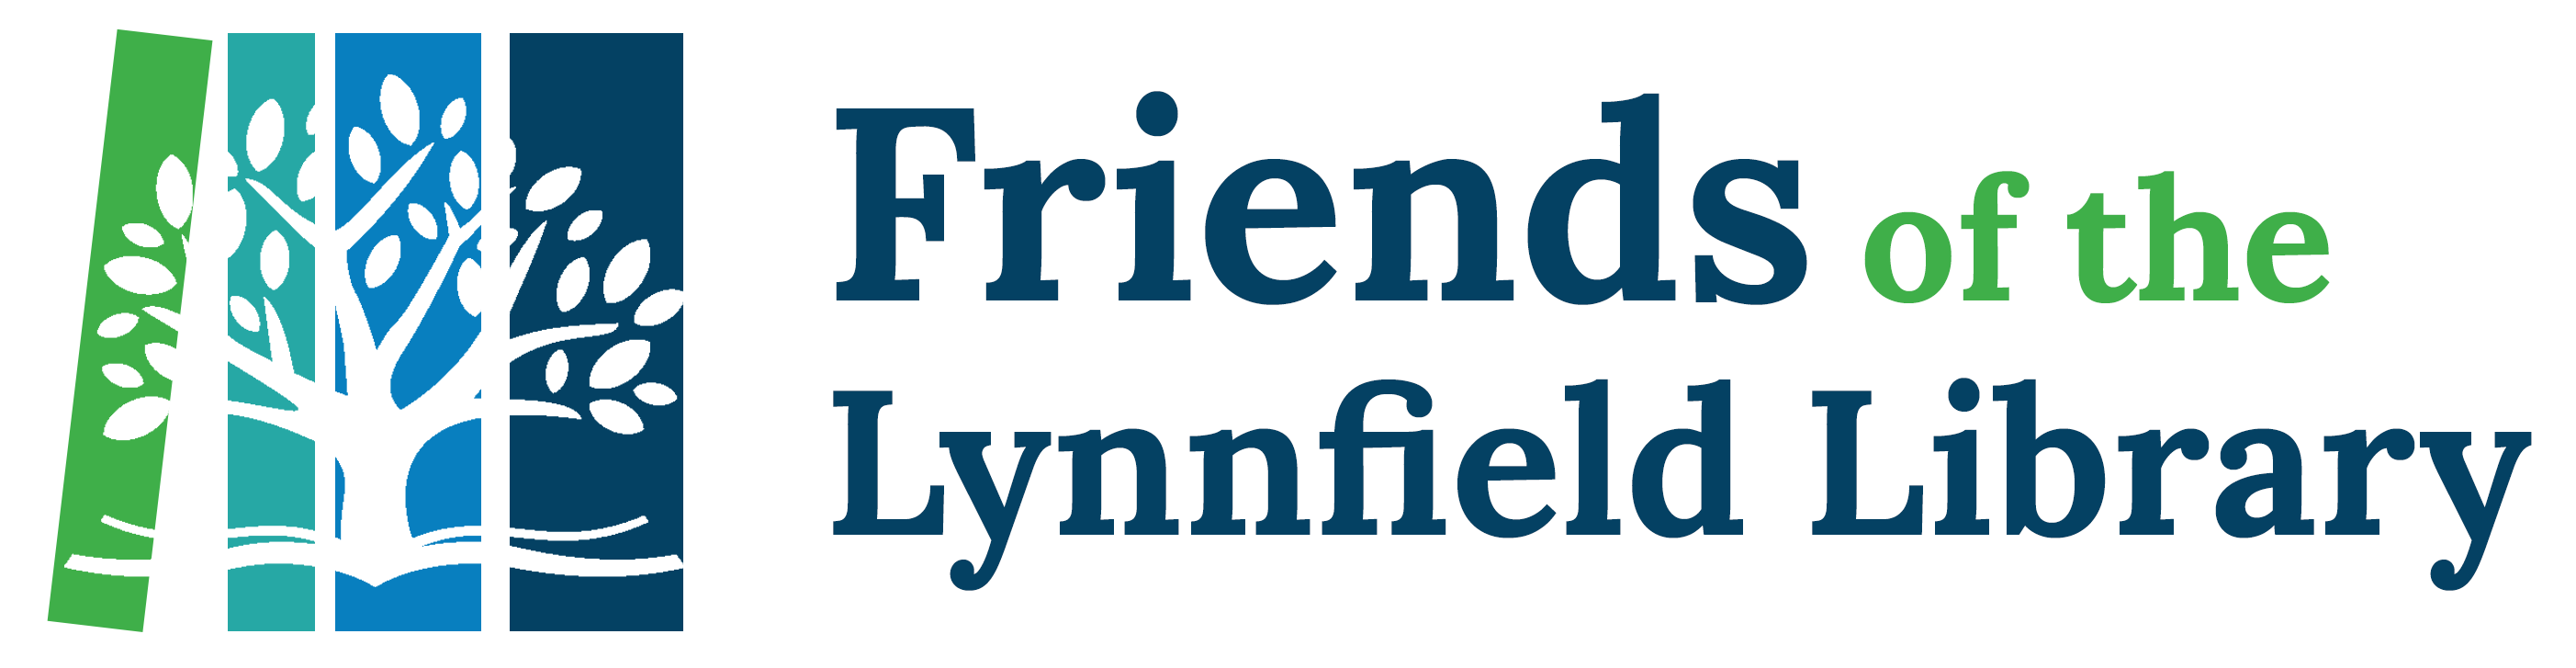 Friends of the Lynnfield Library Logo